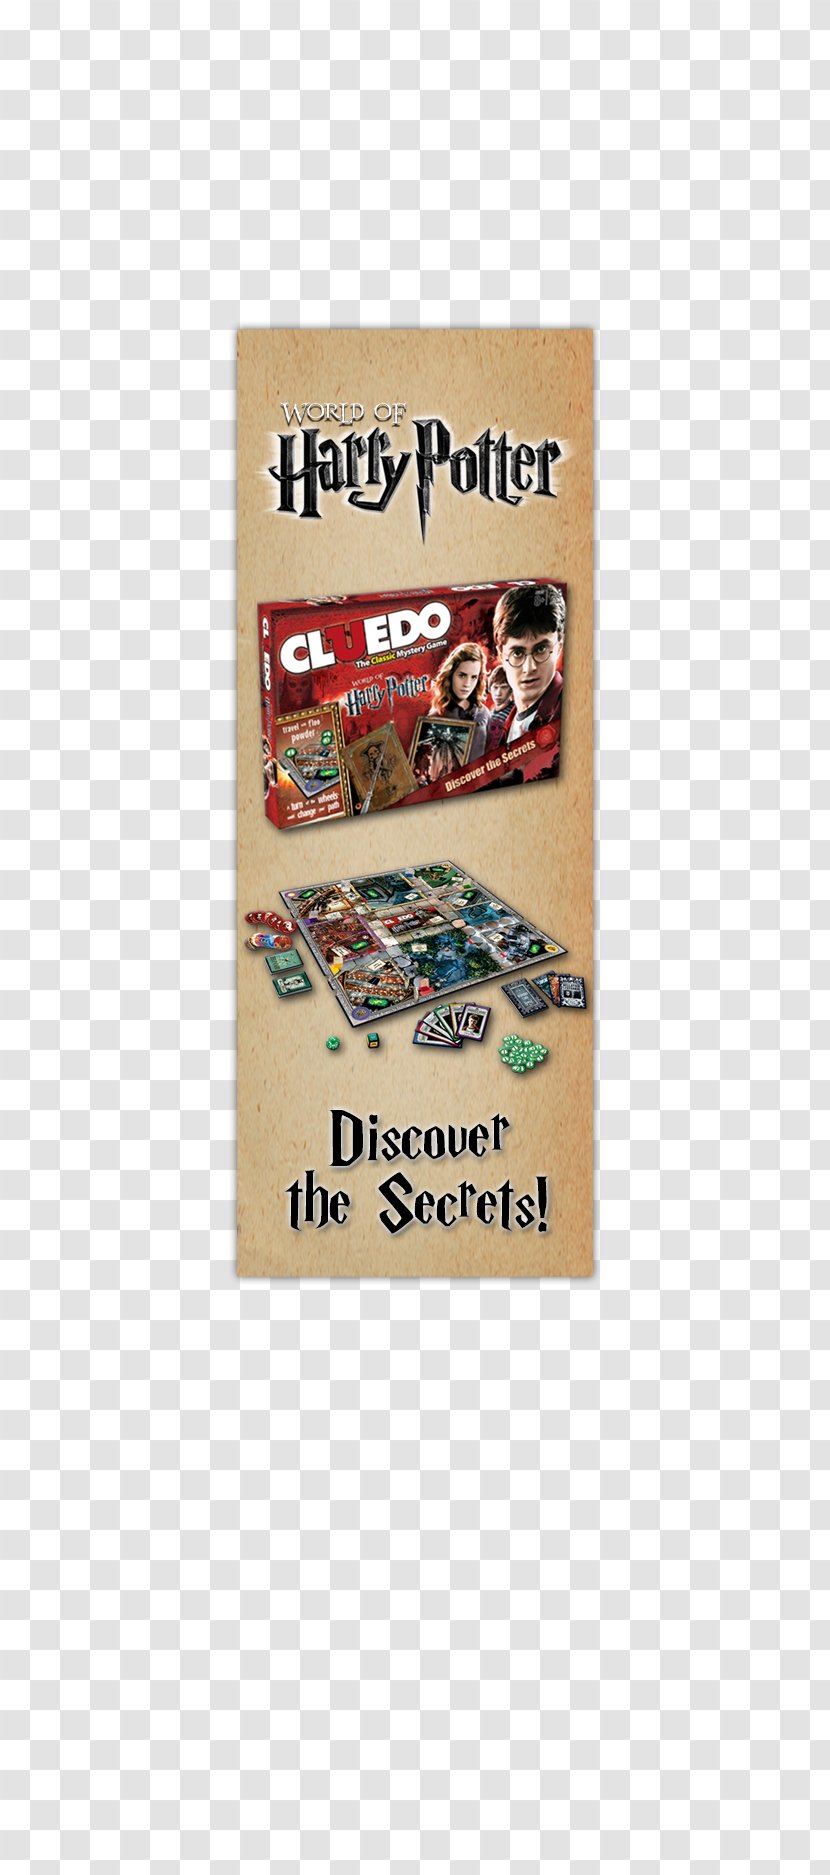 Harry Potter And The Deathly Hallows Cluedo Board Game (Literary Series) - Hasbro - Moves Transparent PNG